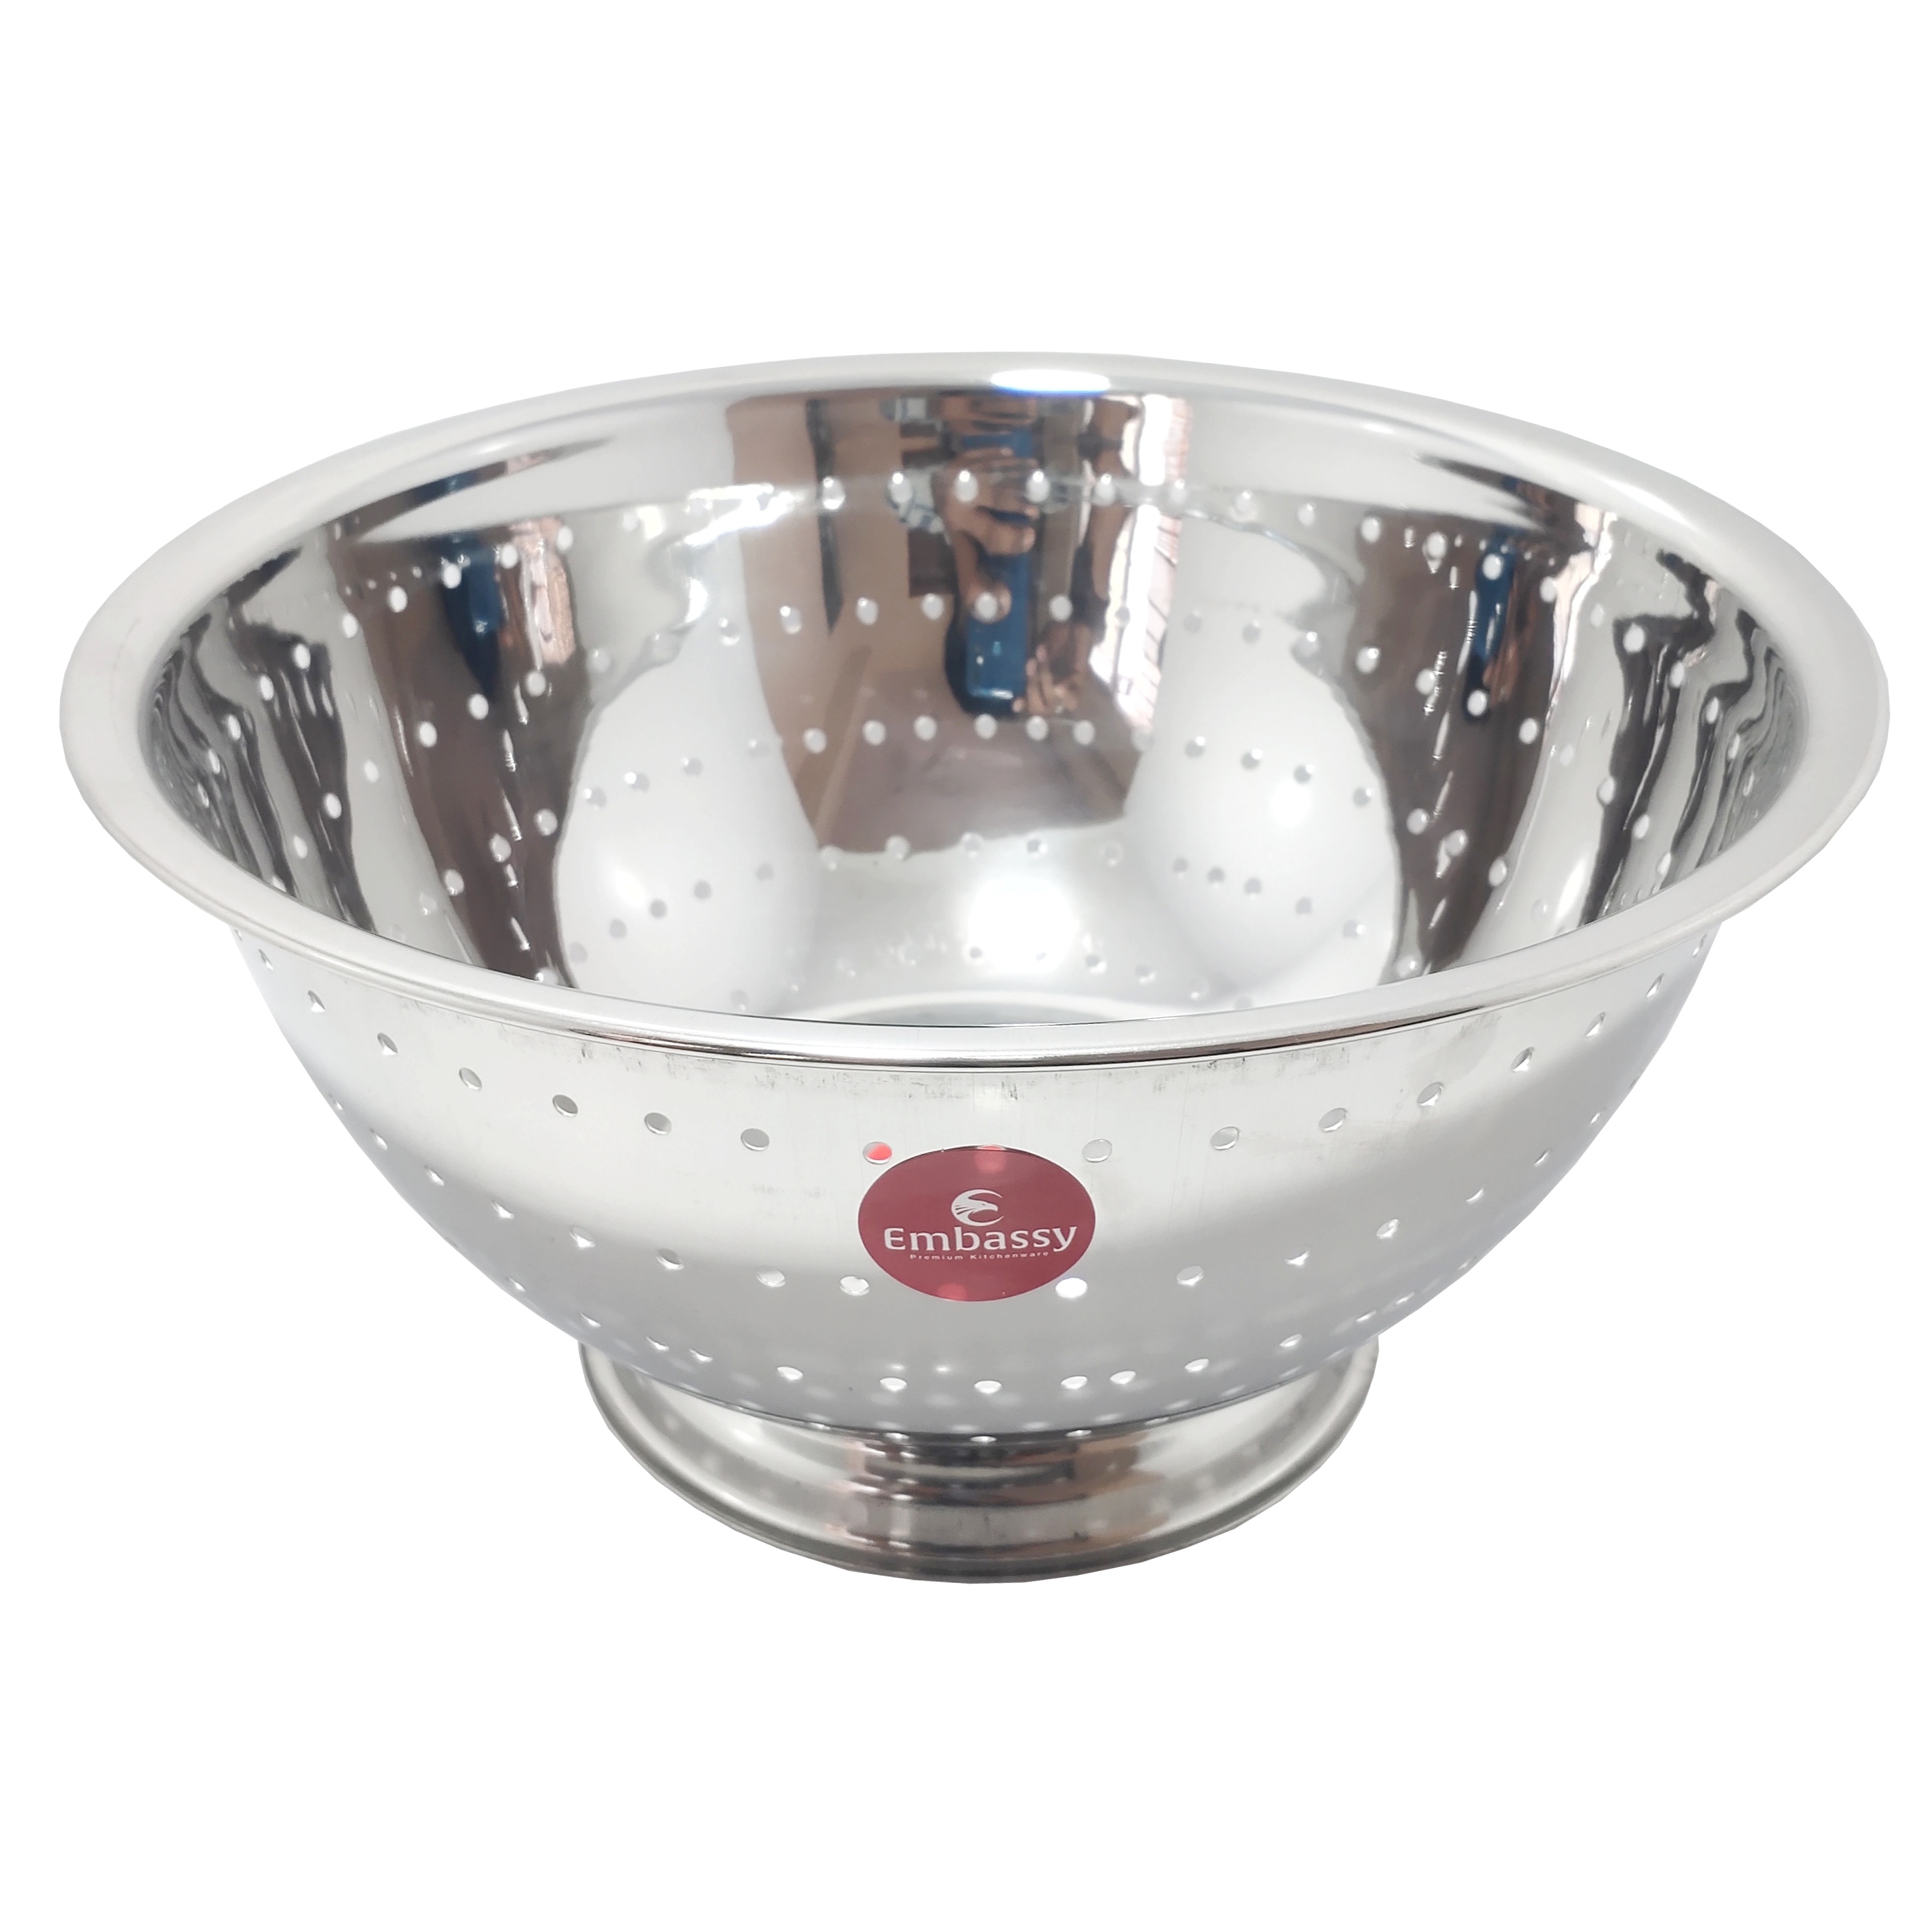 Embassy Stainless Steel Colander Size 06